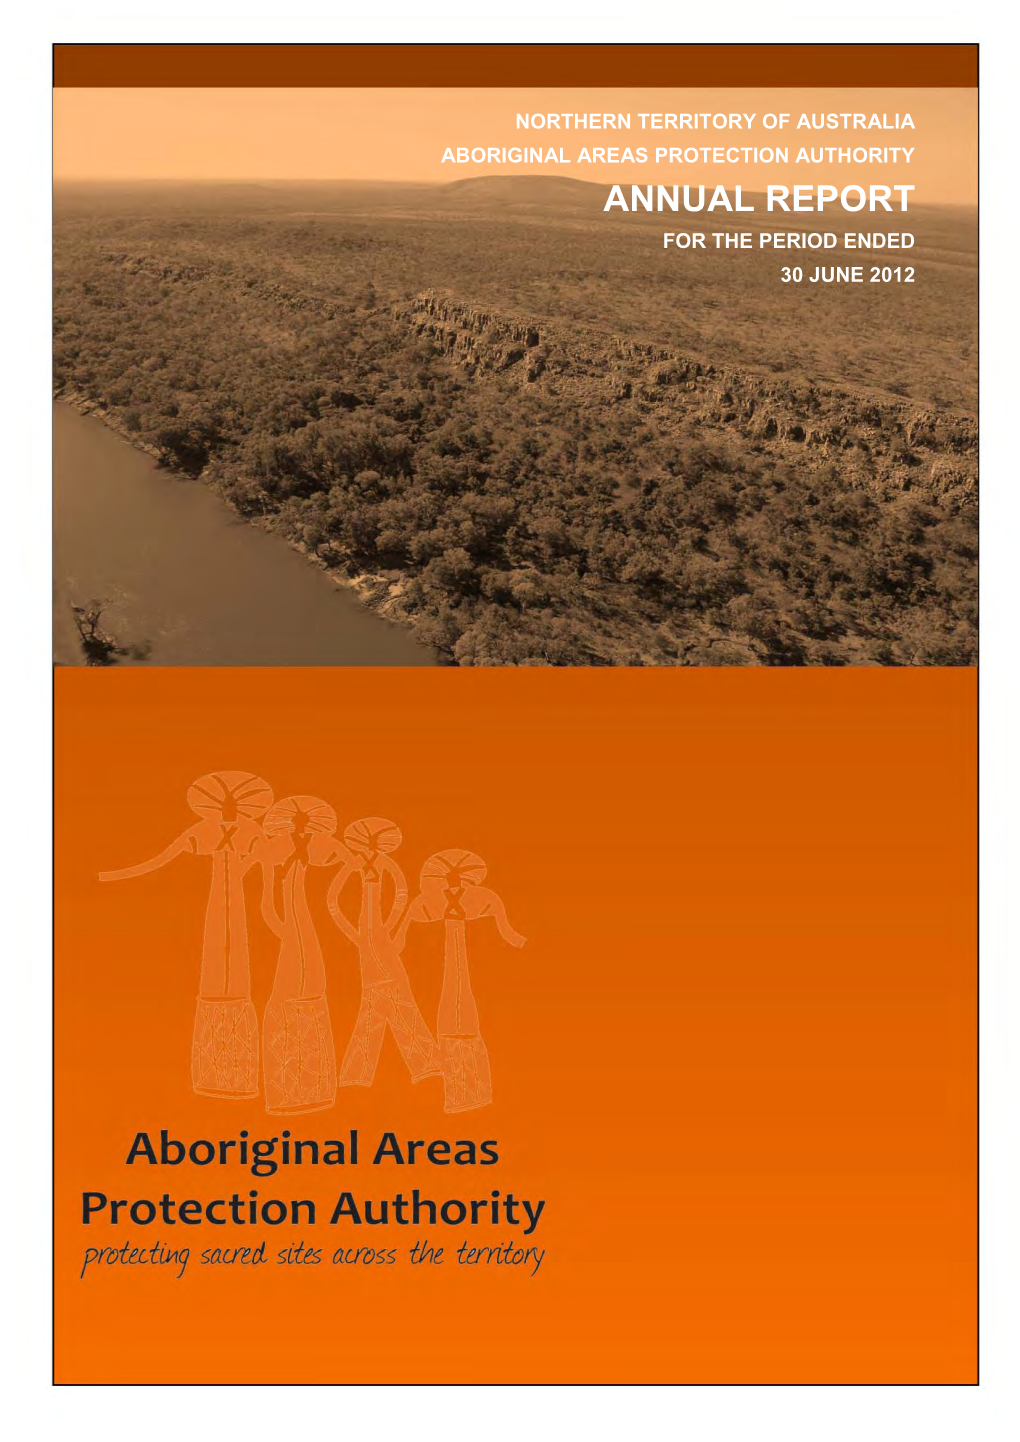 Aboriginal Areas Protection Authority Annual Report 2011-2012